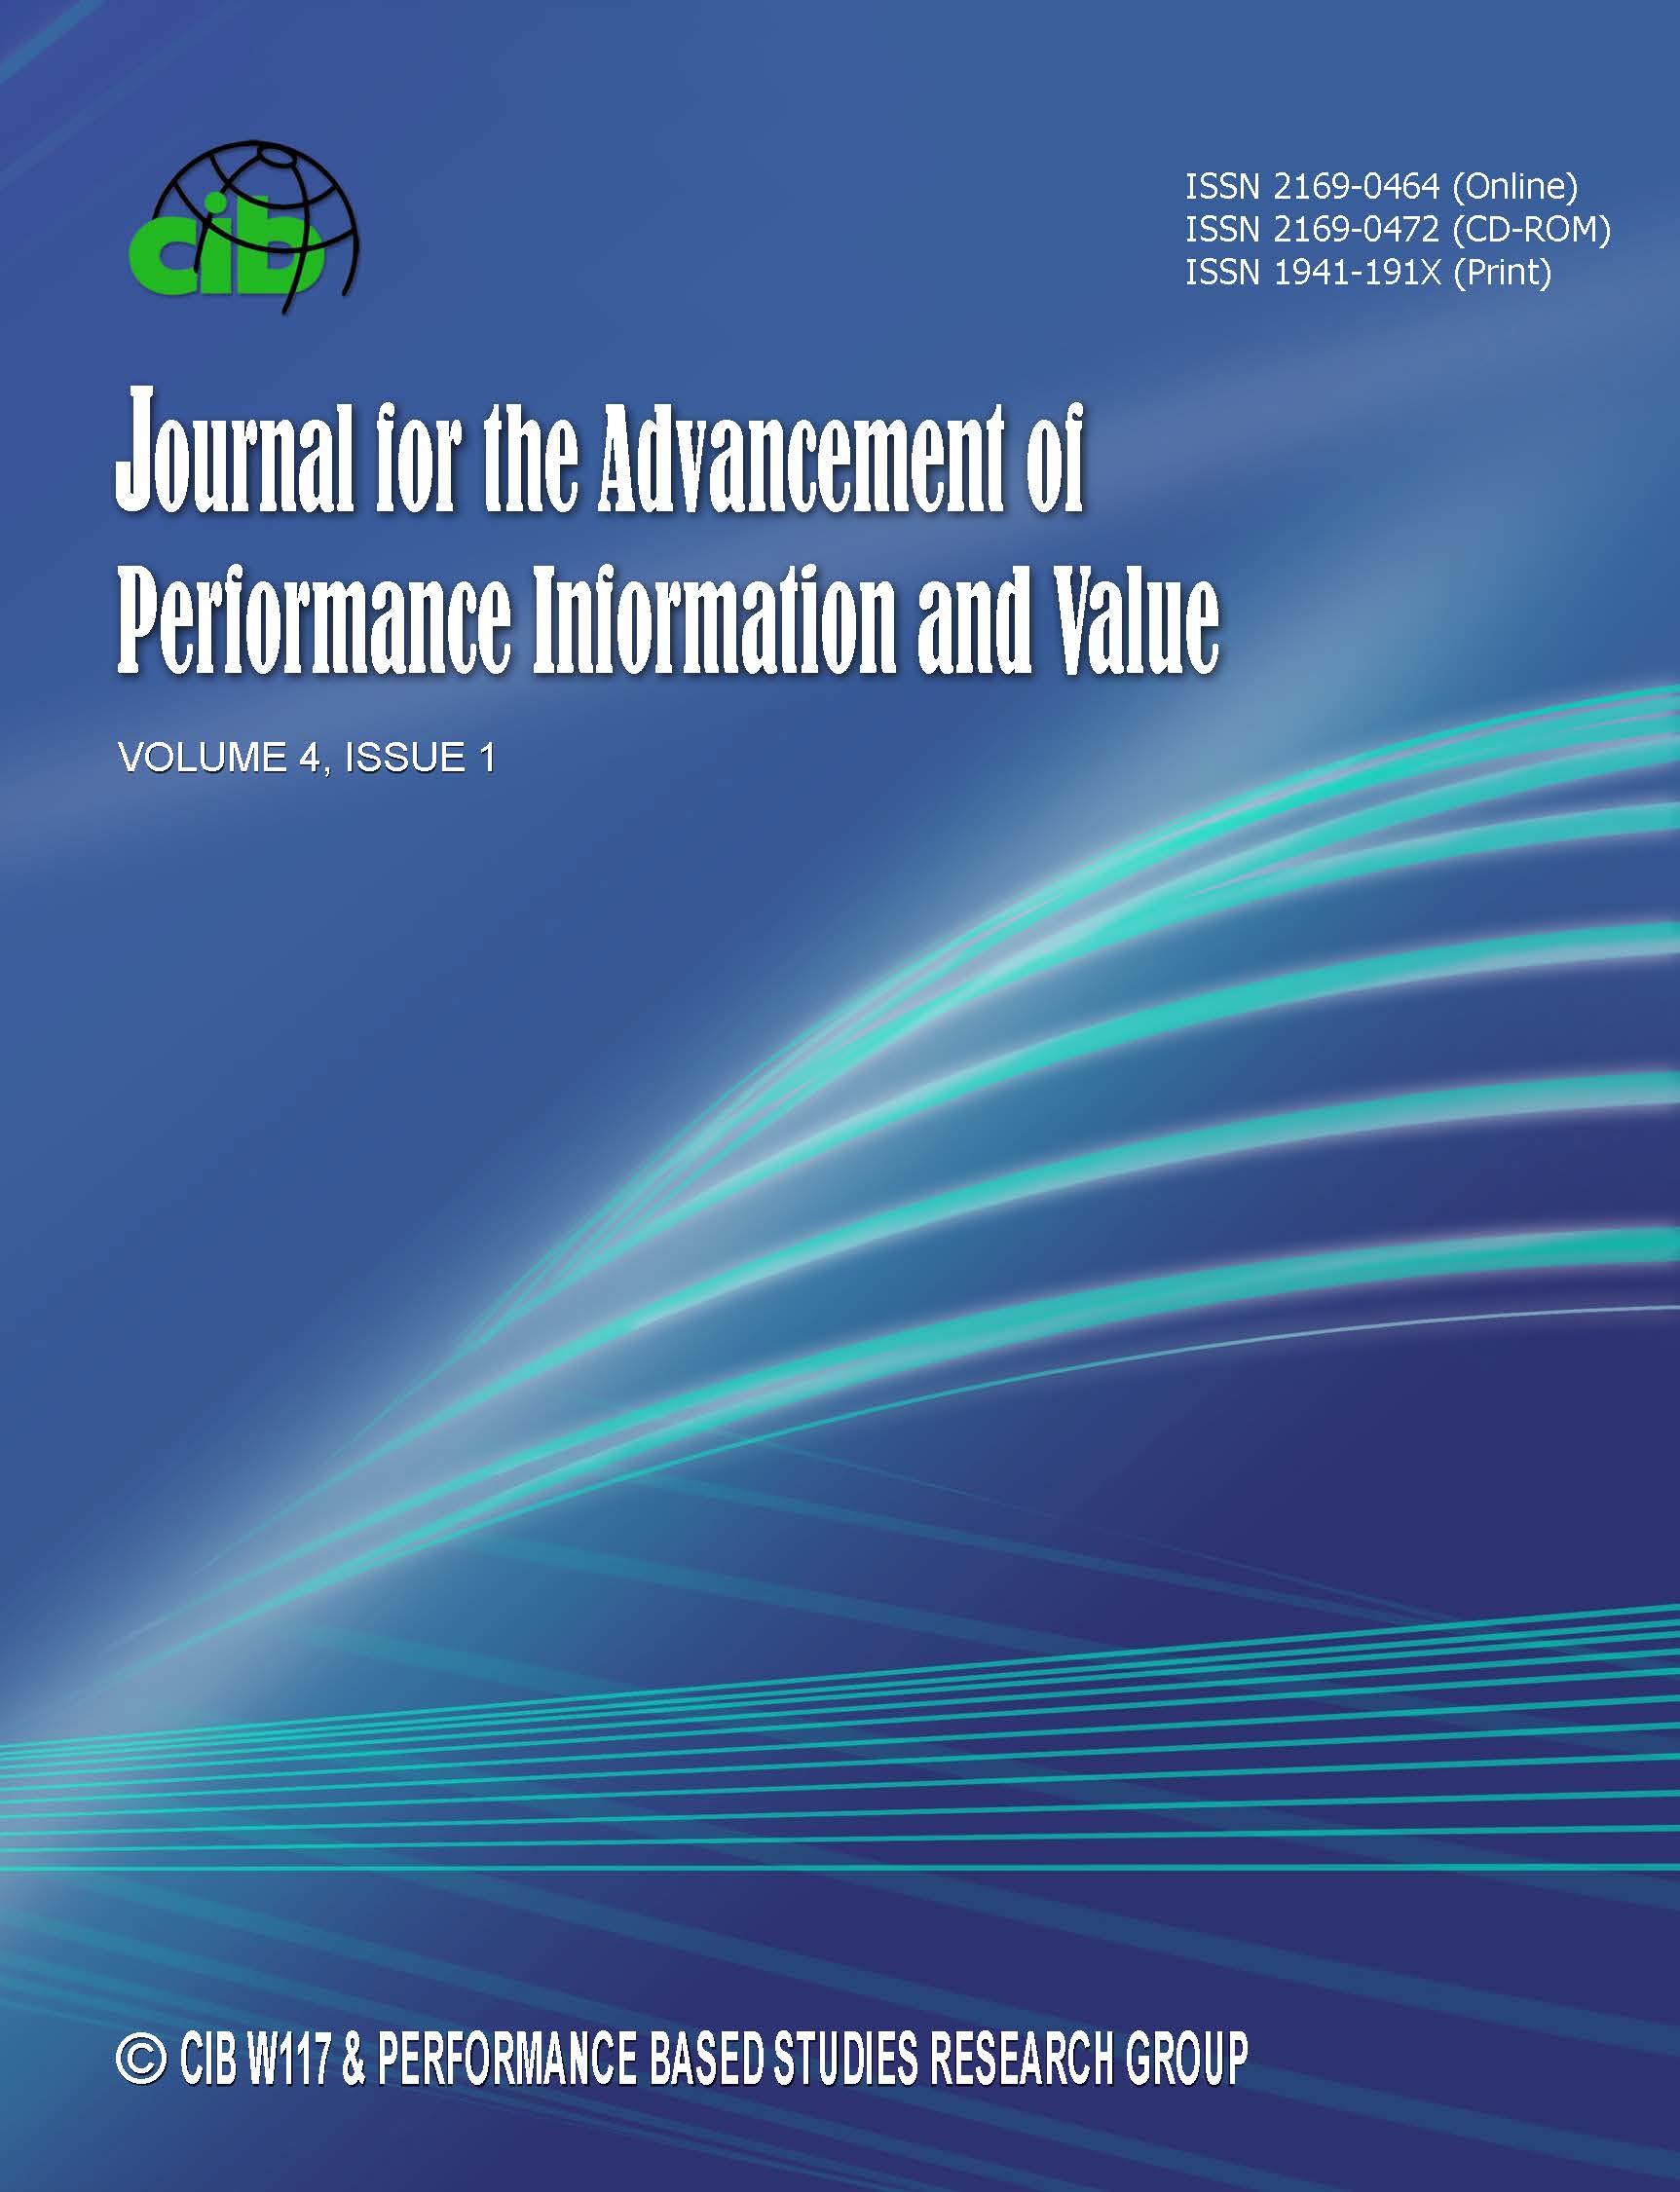 					View Vol. 4 No. 1 (2012): Journal for the Advancement of Performance Information and Value
				